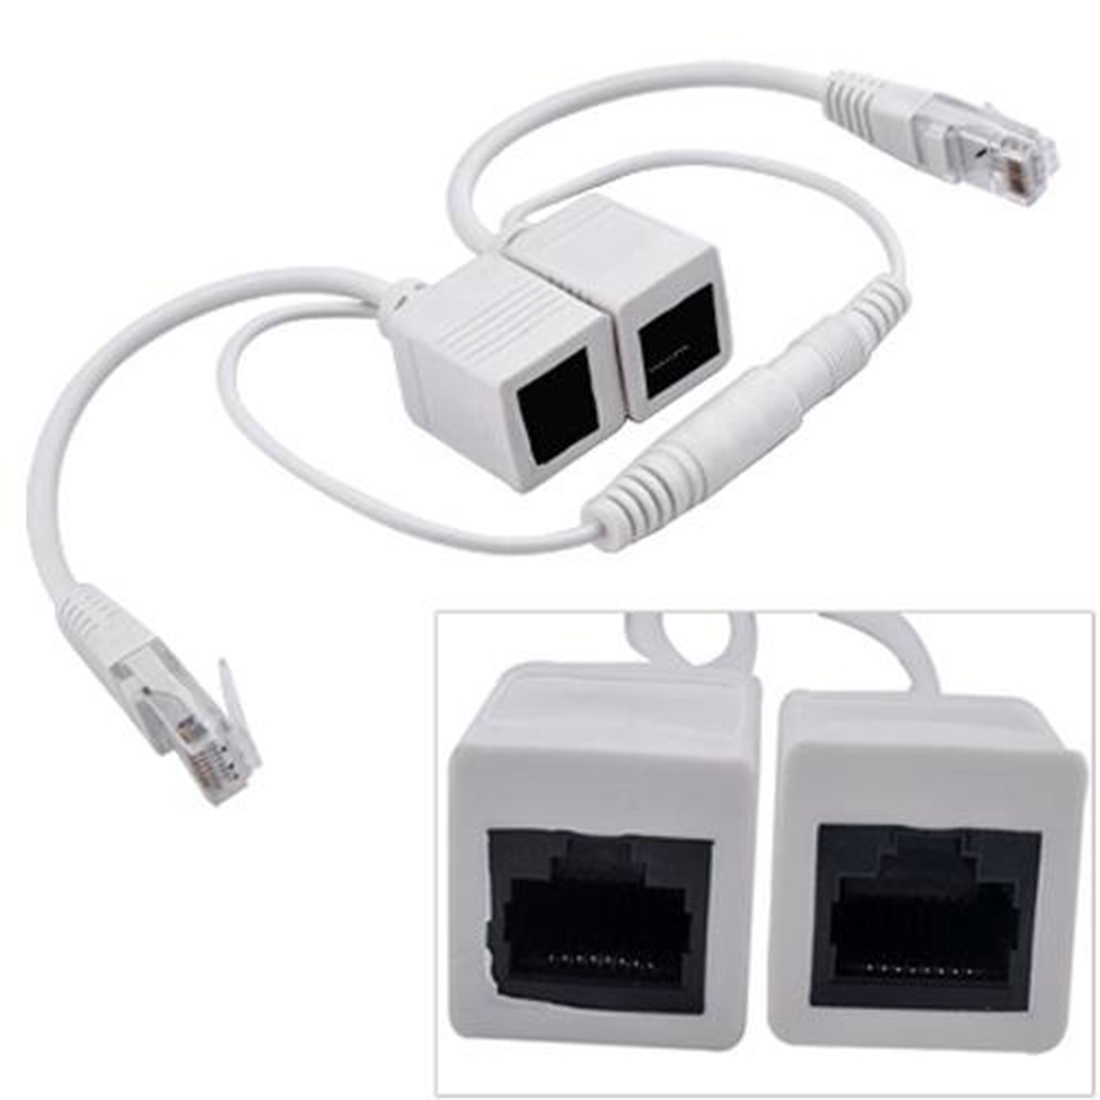 2015 White Poe Power Over Ethernet Injector Splitter Cable Kit For Ip Telephones Cameras